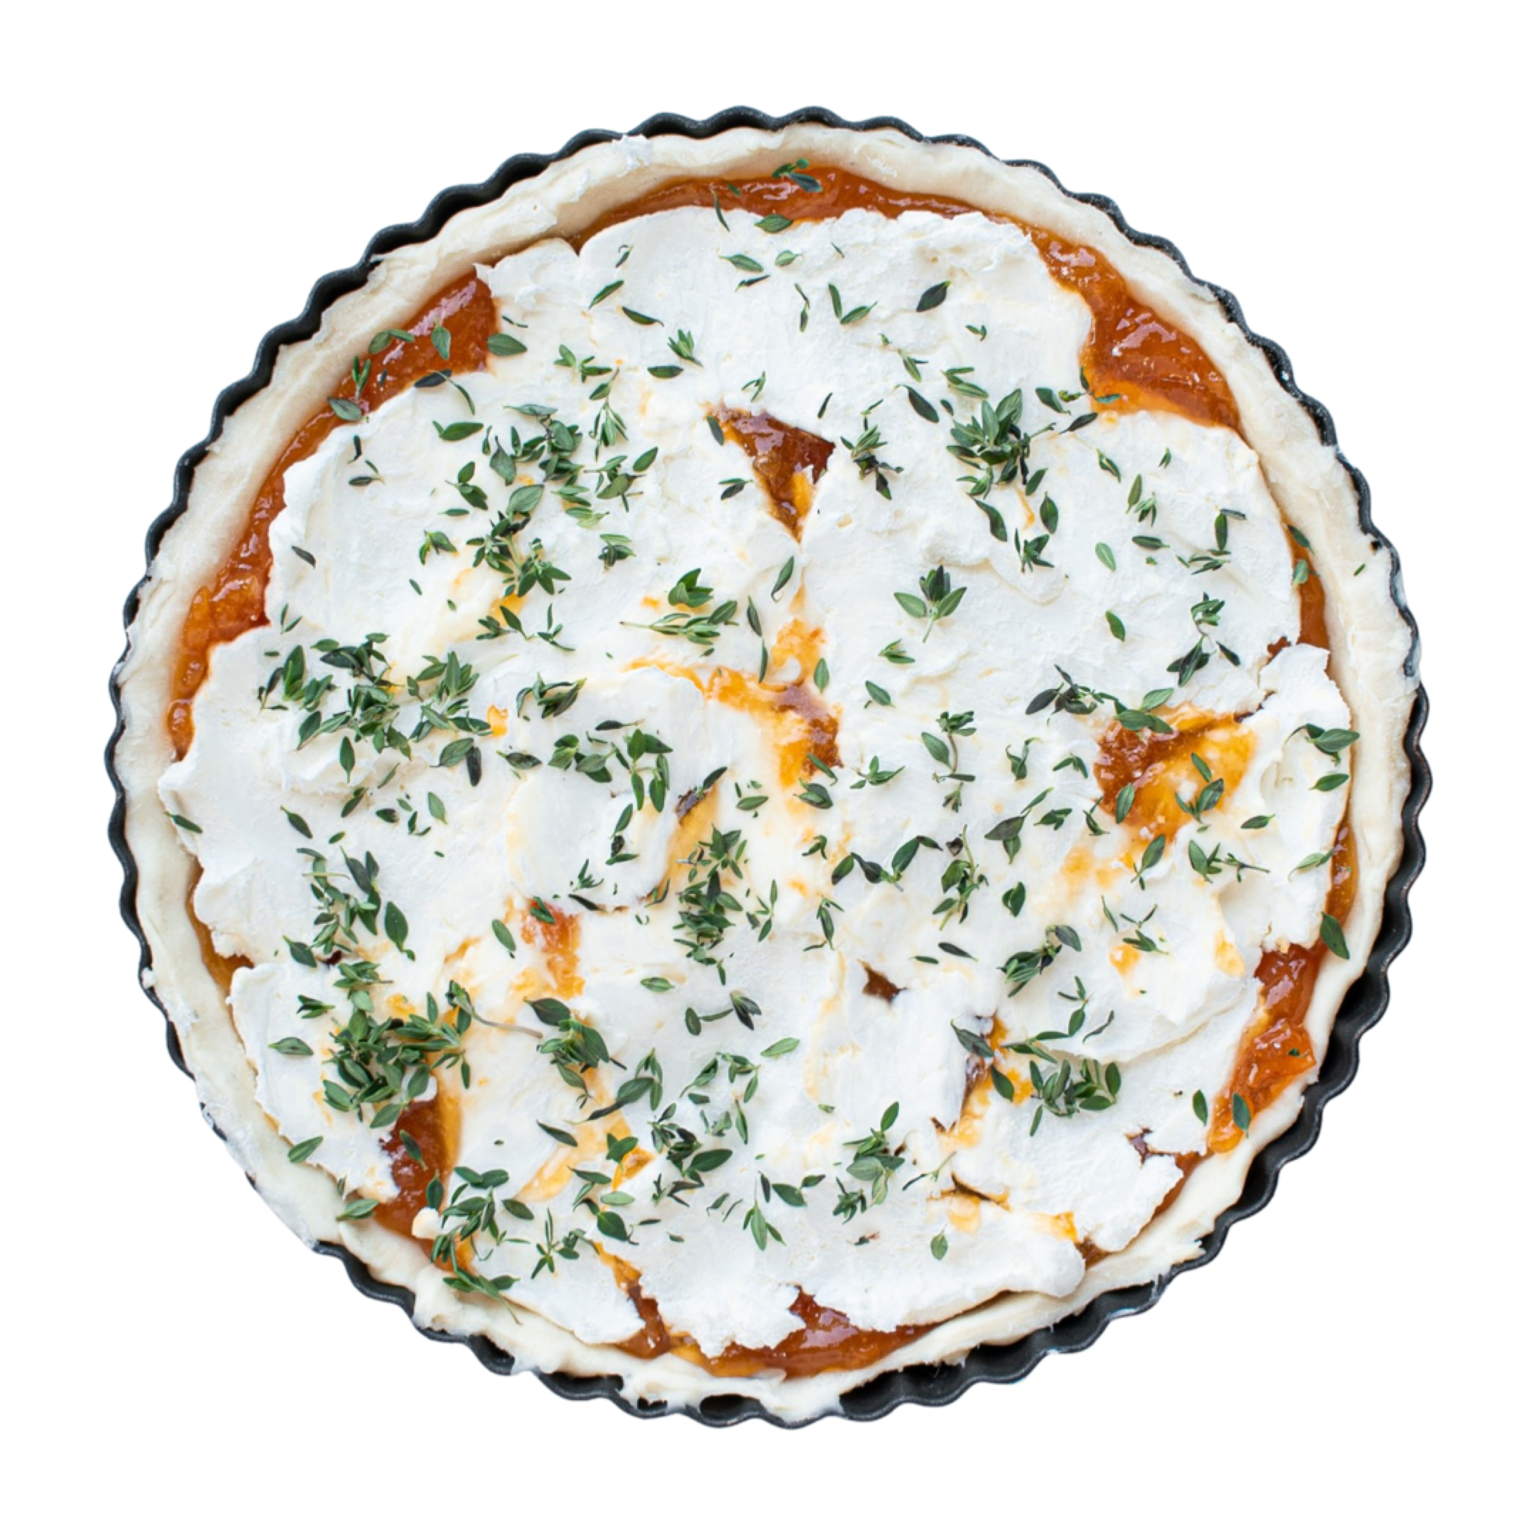 Layer cream cheese and thyme
